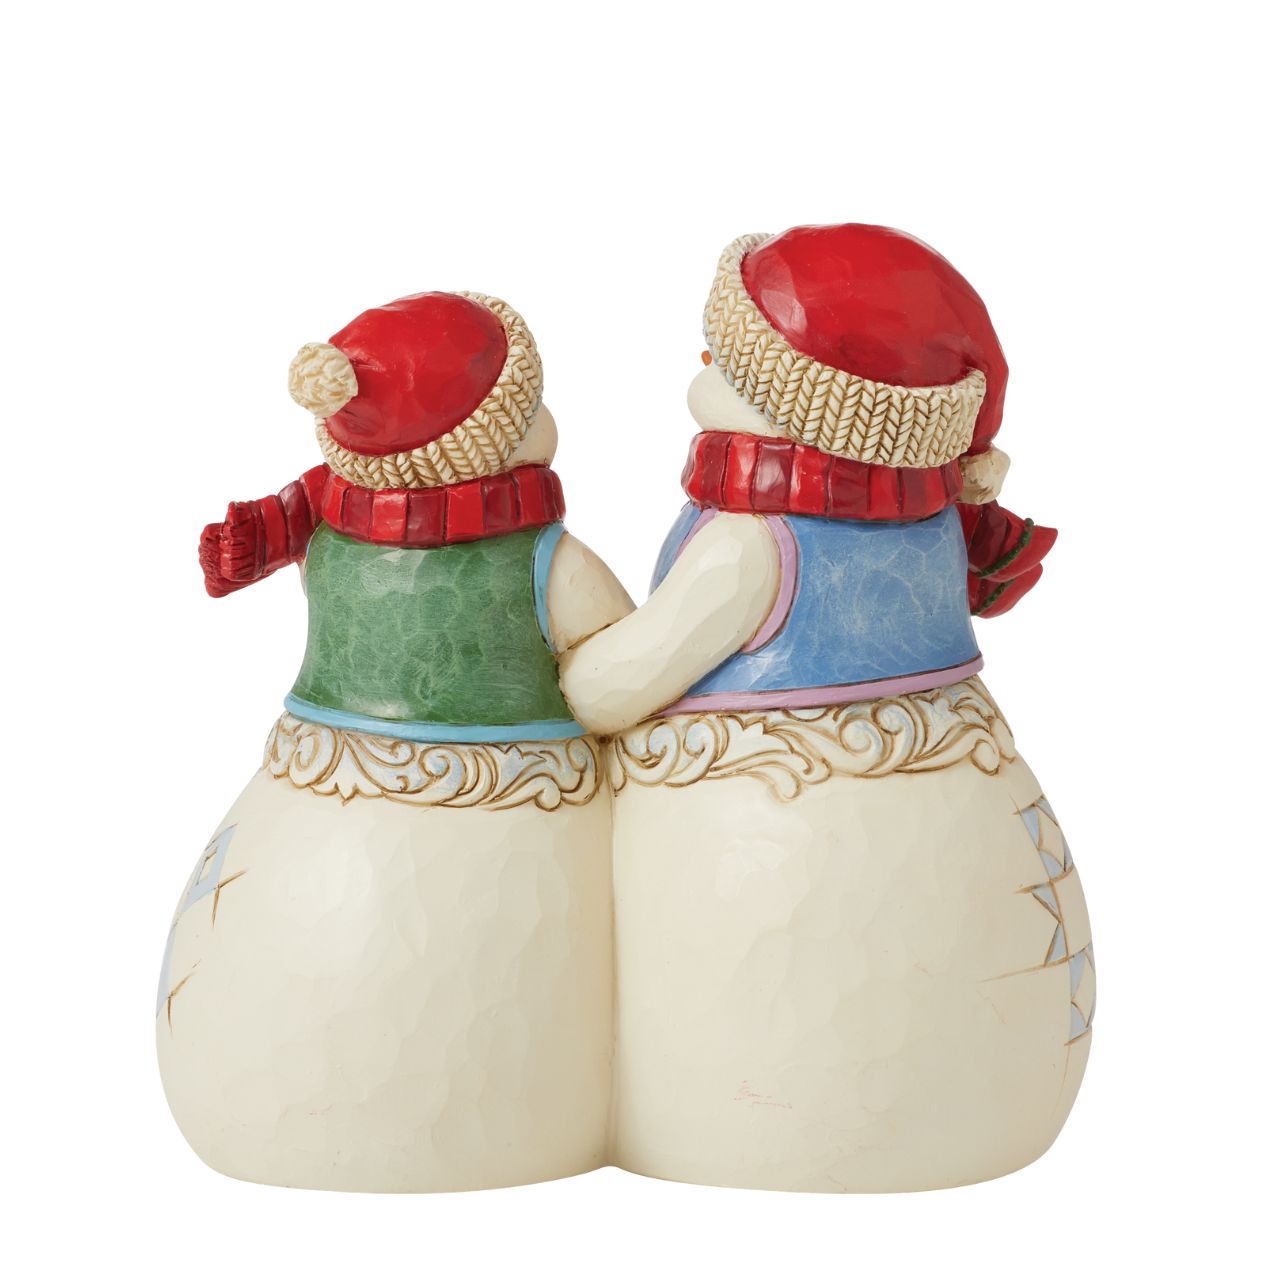 Heartwood Creek Christmas Collection Snowman Couple with Puppy Figurine  Designed by award winning artist Jim Shore as part of the Heartwood Creek Christmas Collection, hand crafted using high quality cast stone and hand painted, this Snowman couple with their cute puppy is perfect for the Christmas season.